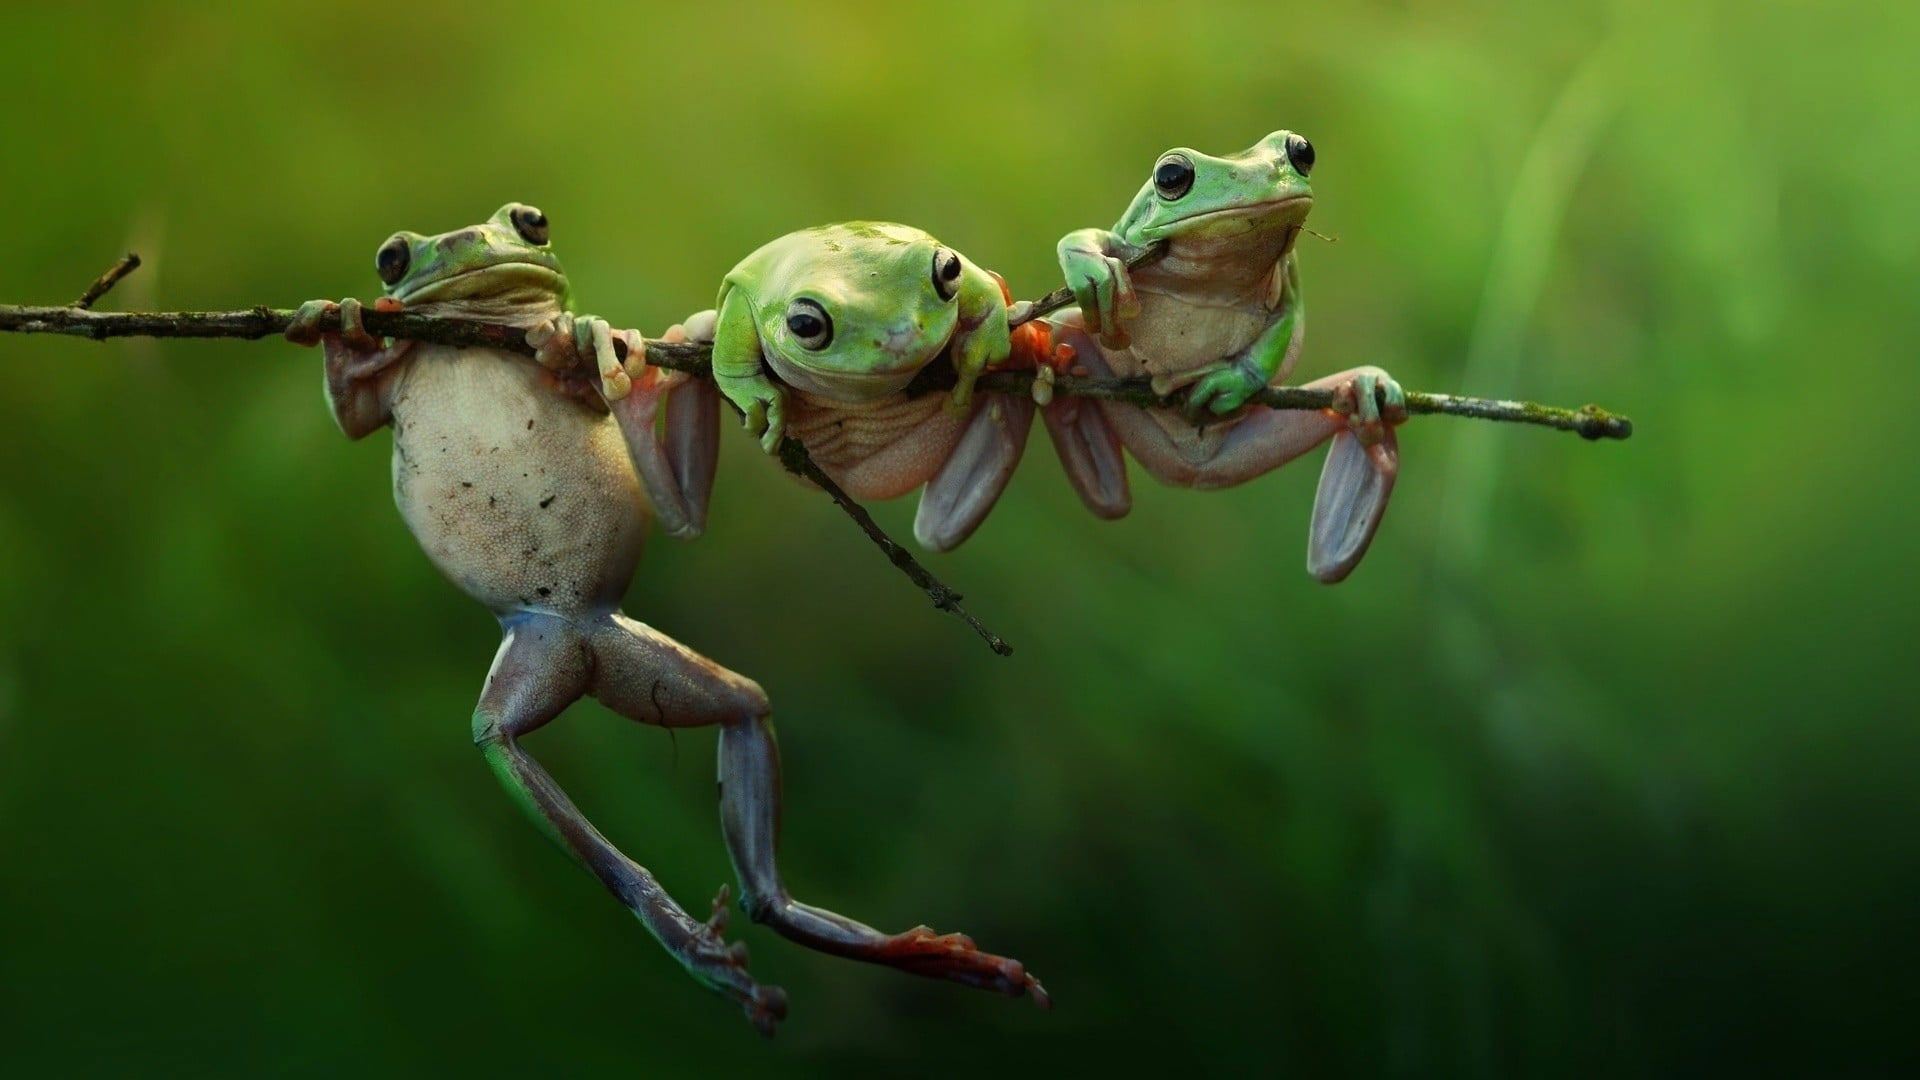 Three frogs on a branch - Frog